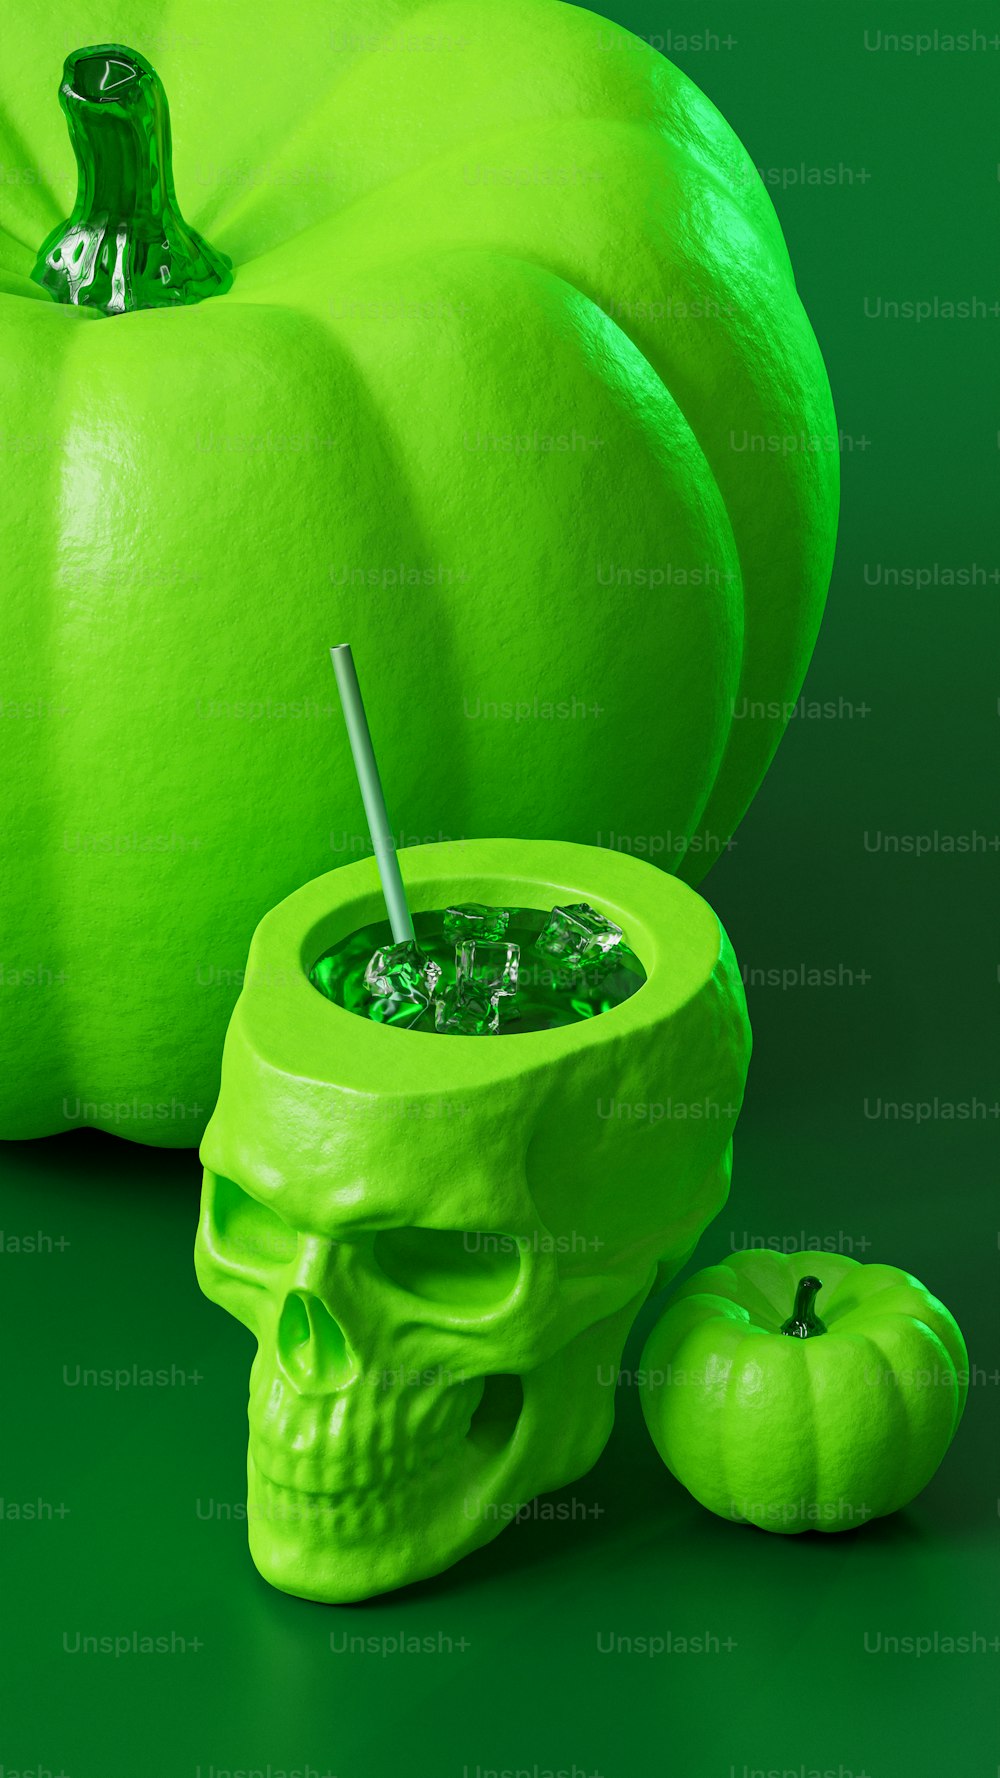 a green skull cup with a straw in it next to a green pumpkin